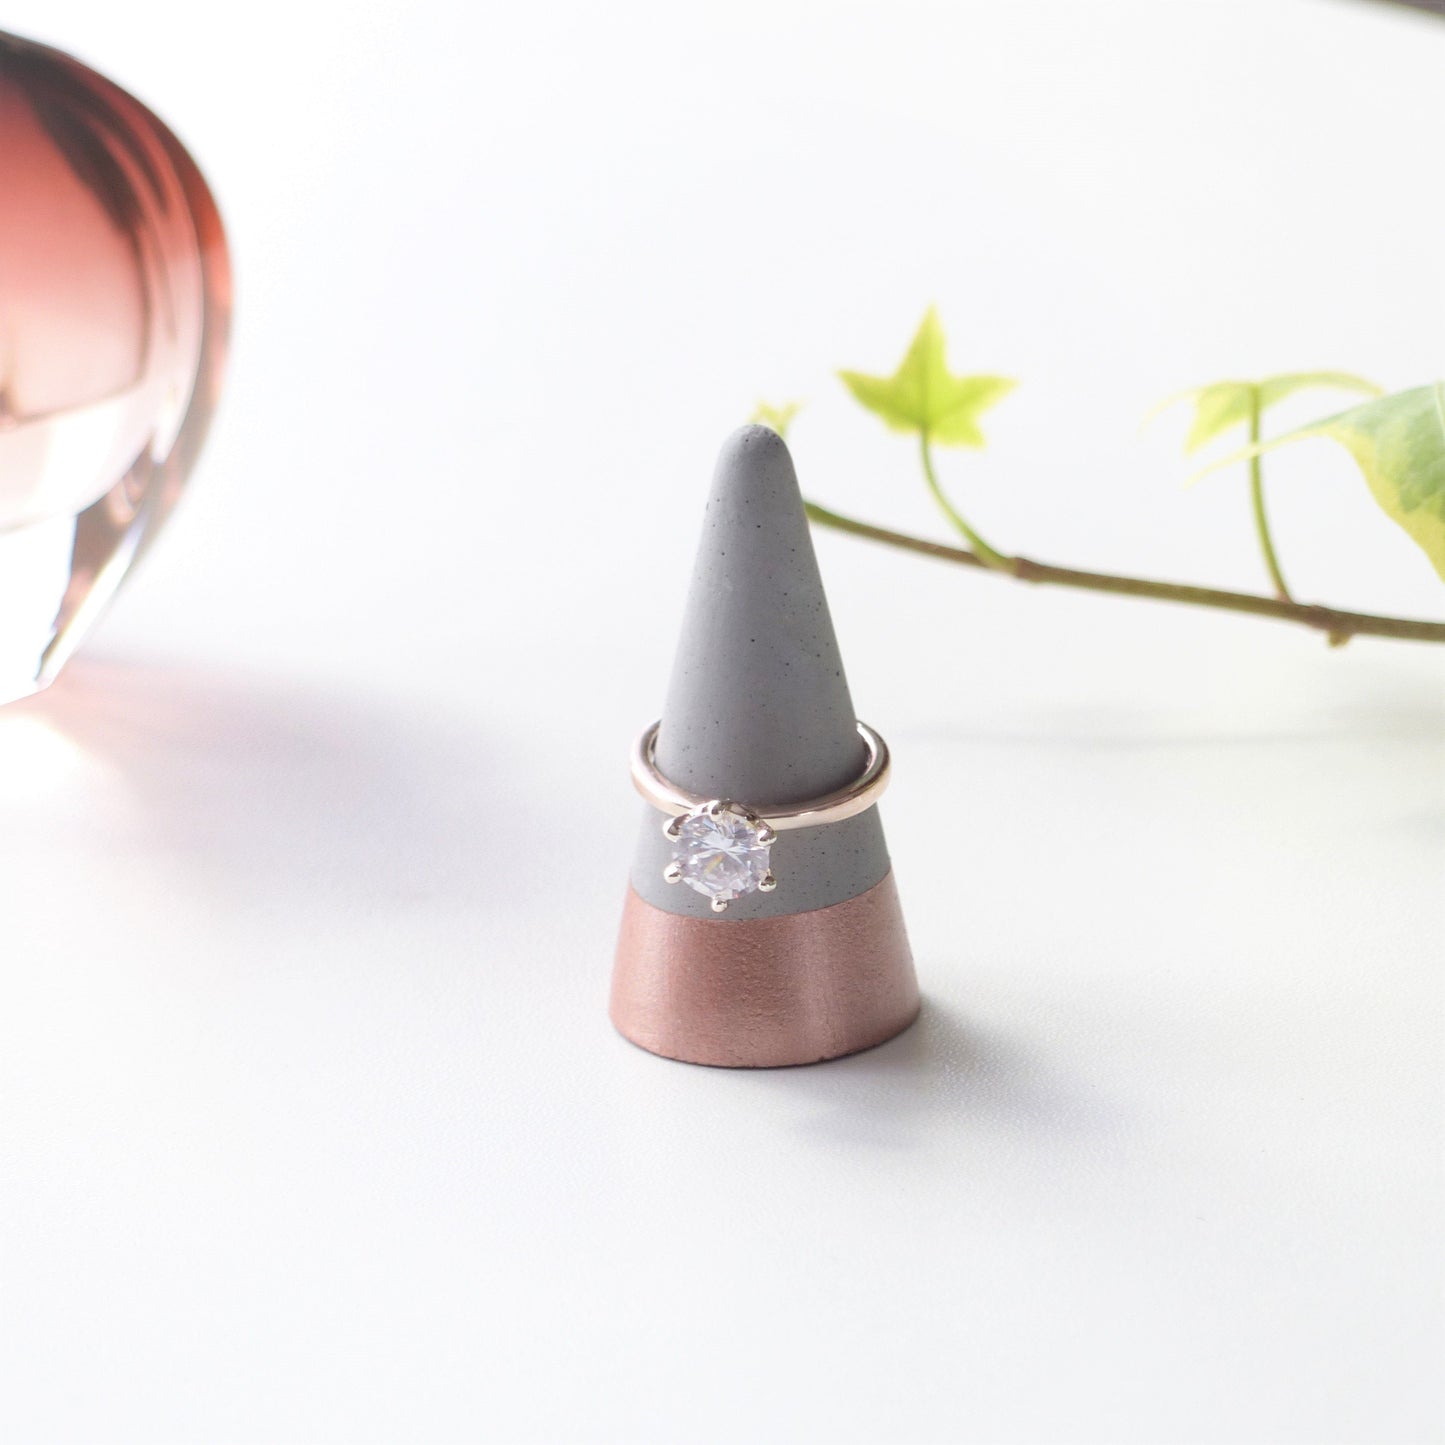 Conical display for wedding rings